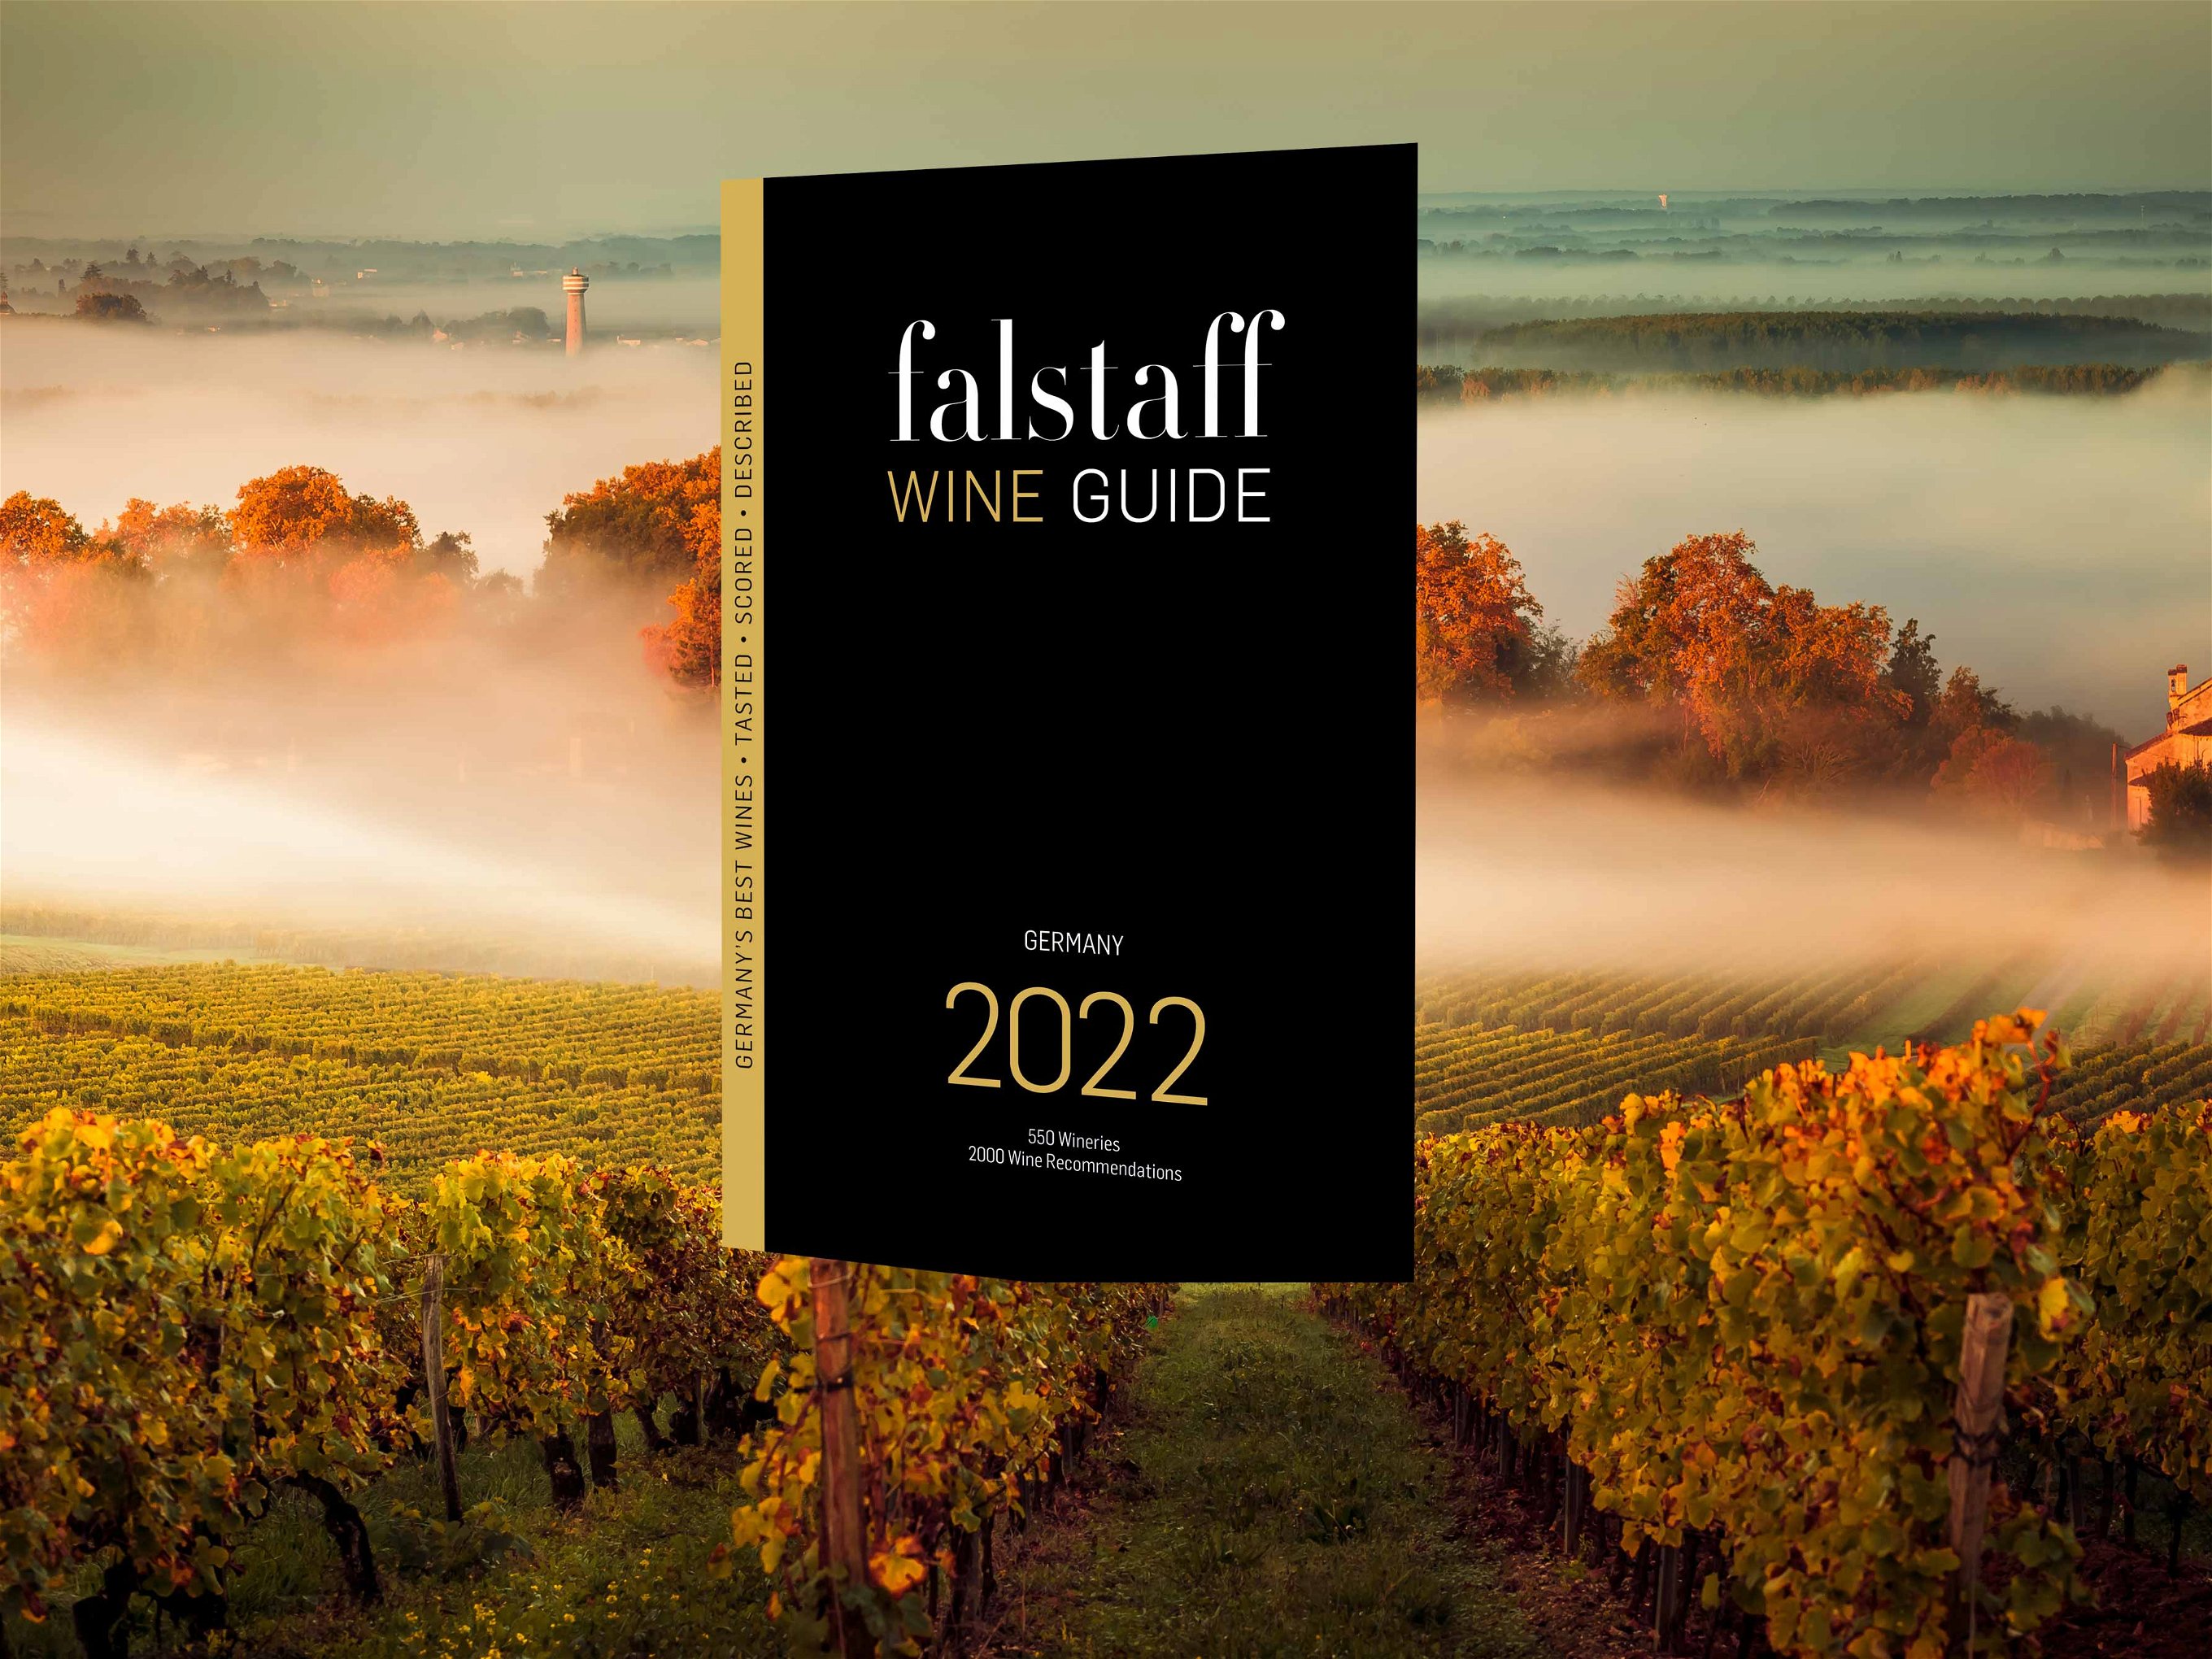 Wine Guide Germany 2022.